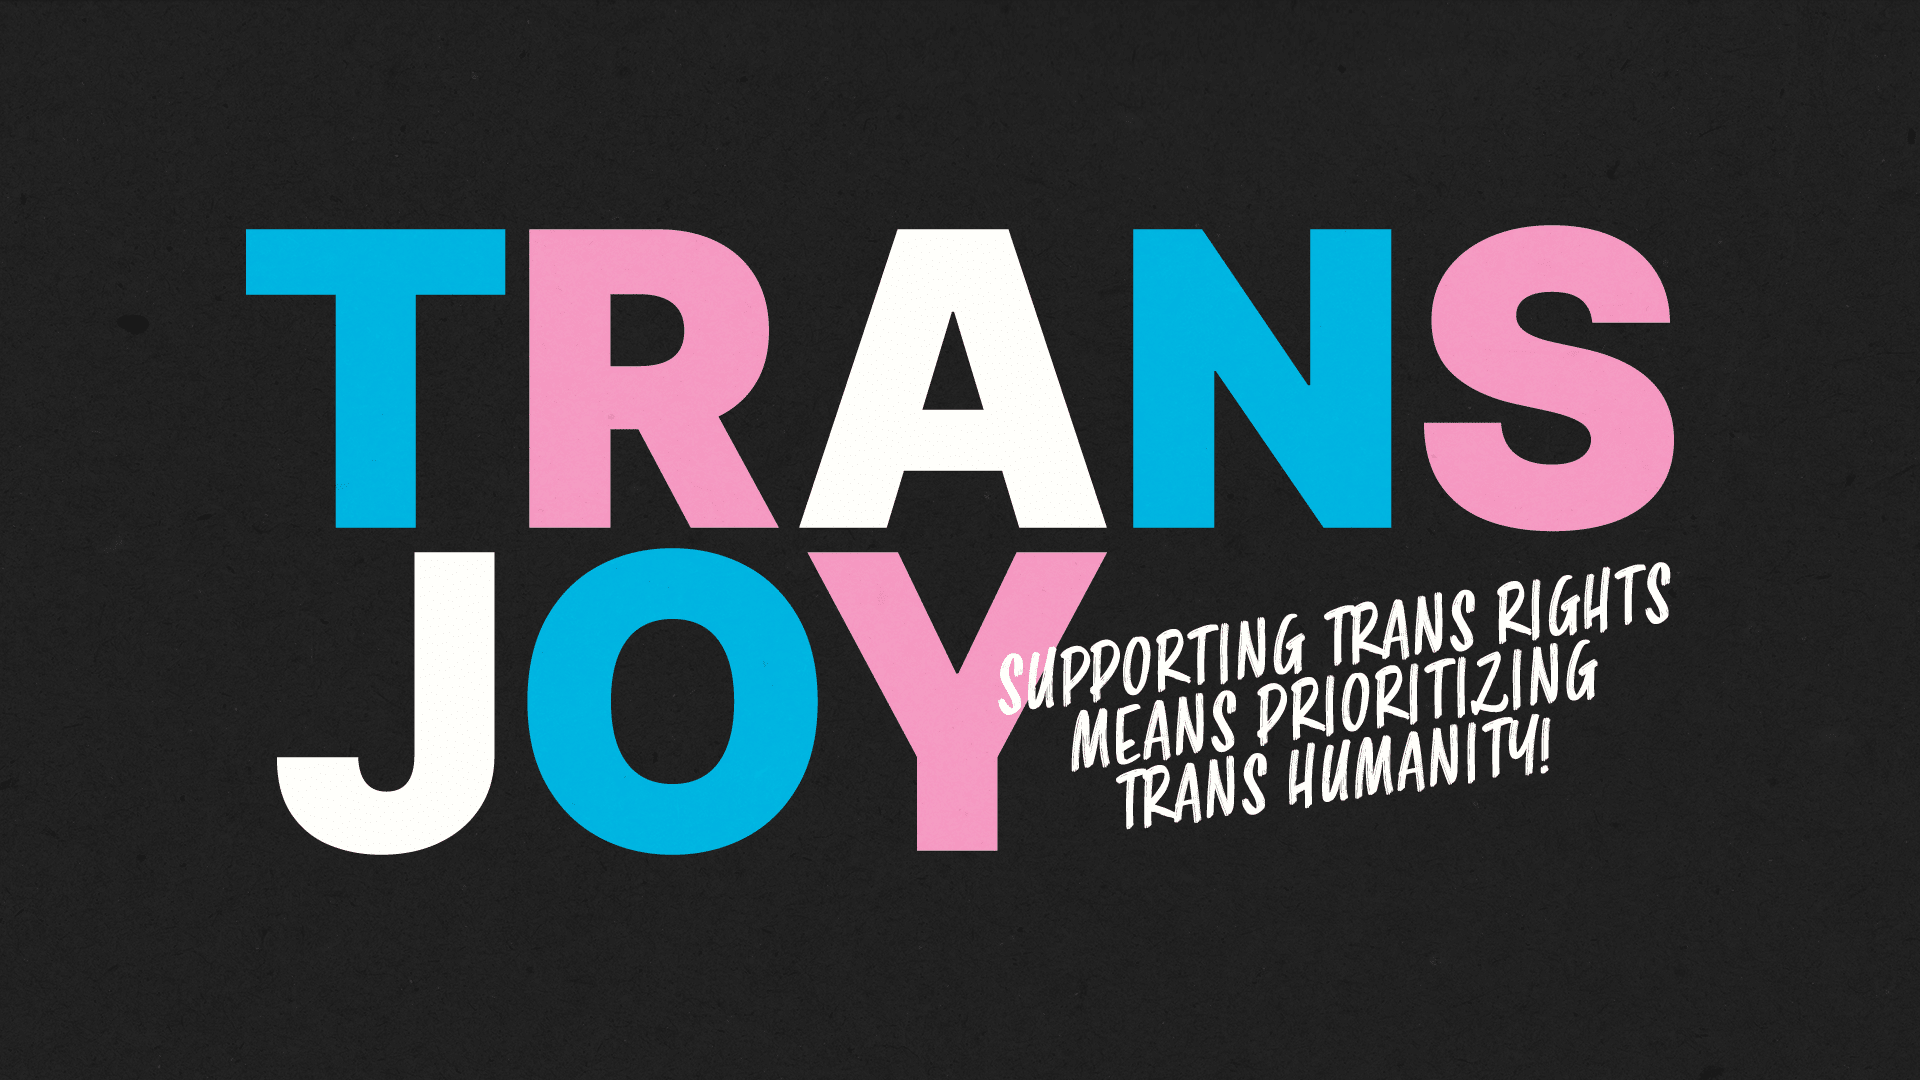 Trans joy: Supporting trans rights means prioritizing trans humanity!